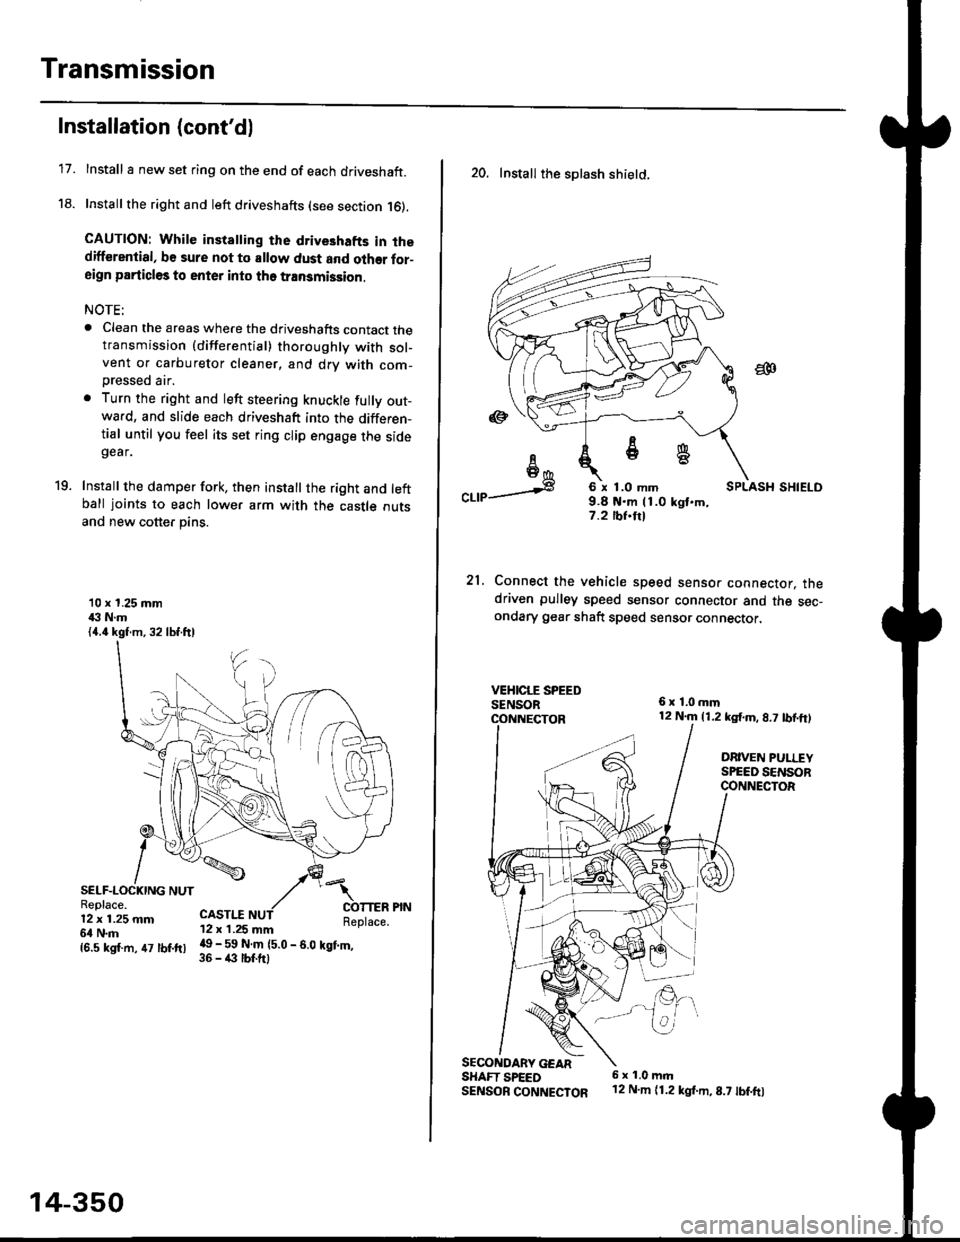 HONDA CIVIC 1999 6.G Workshop Manual Transmission
17.
Installation (contd)
Install I new set ring on the end of each driveshaft.
Install the right and left driveshafts (see section 16).
CAUTION: While instatling the drive3hafts in thedi